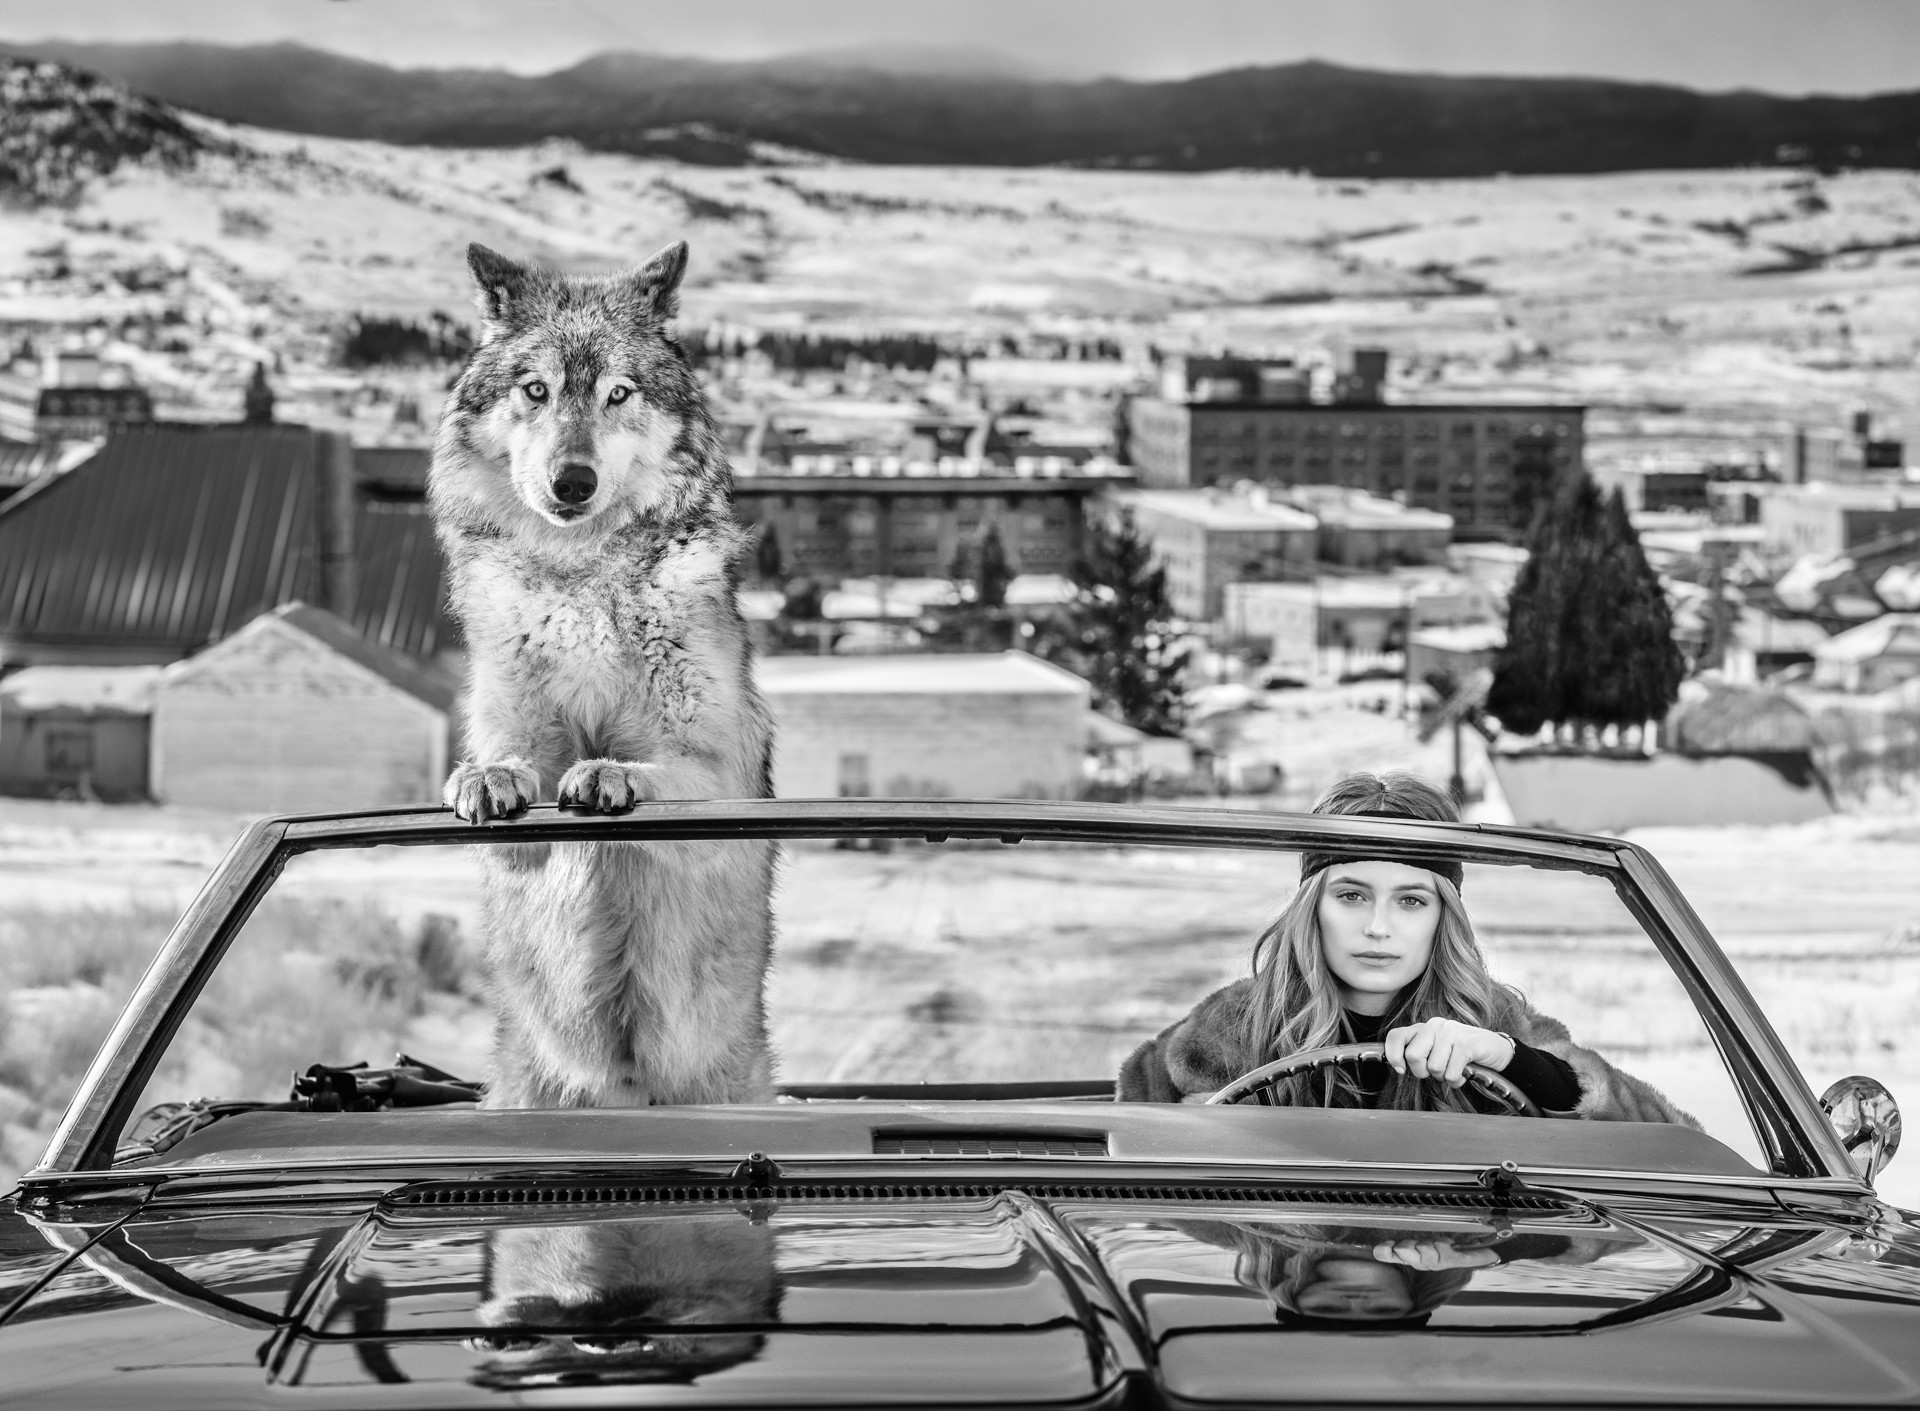 Bonnie and Clyde by David Yarrow